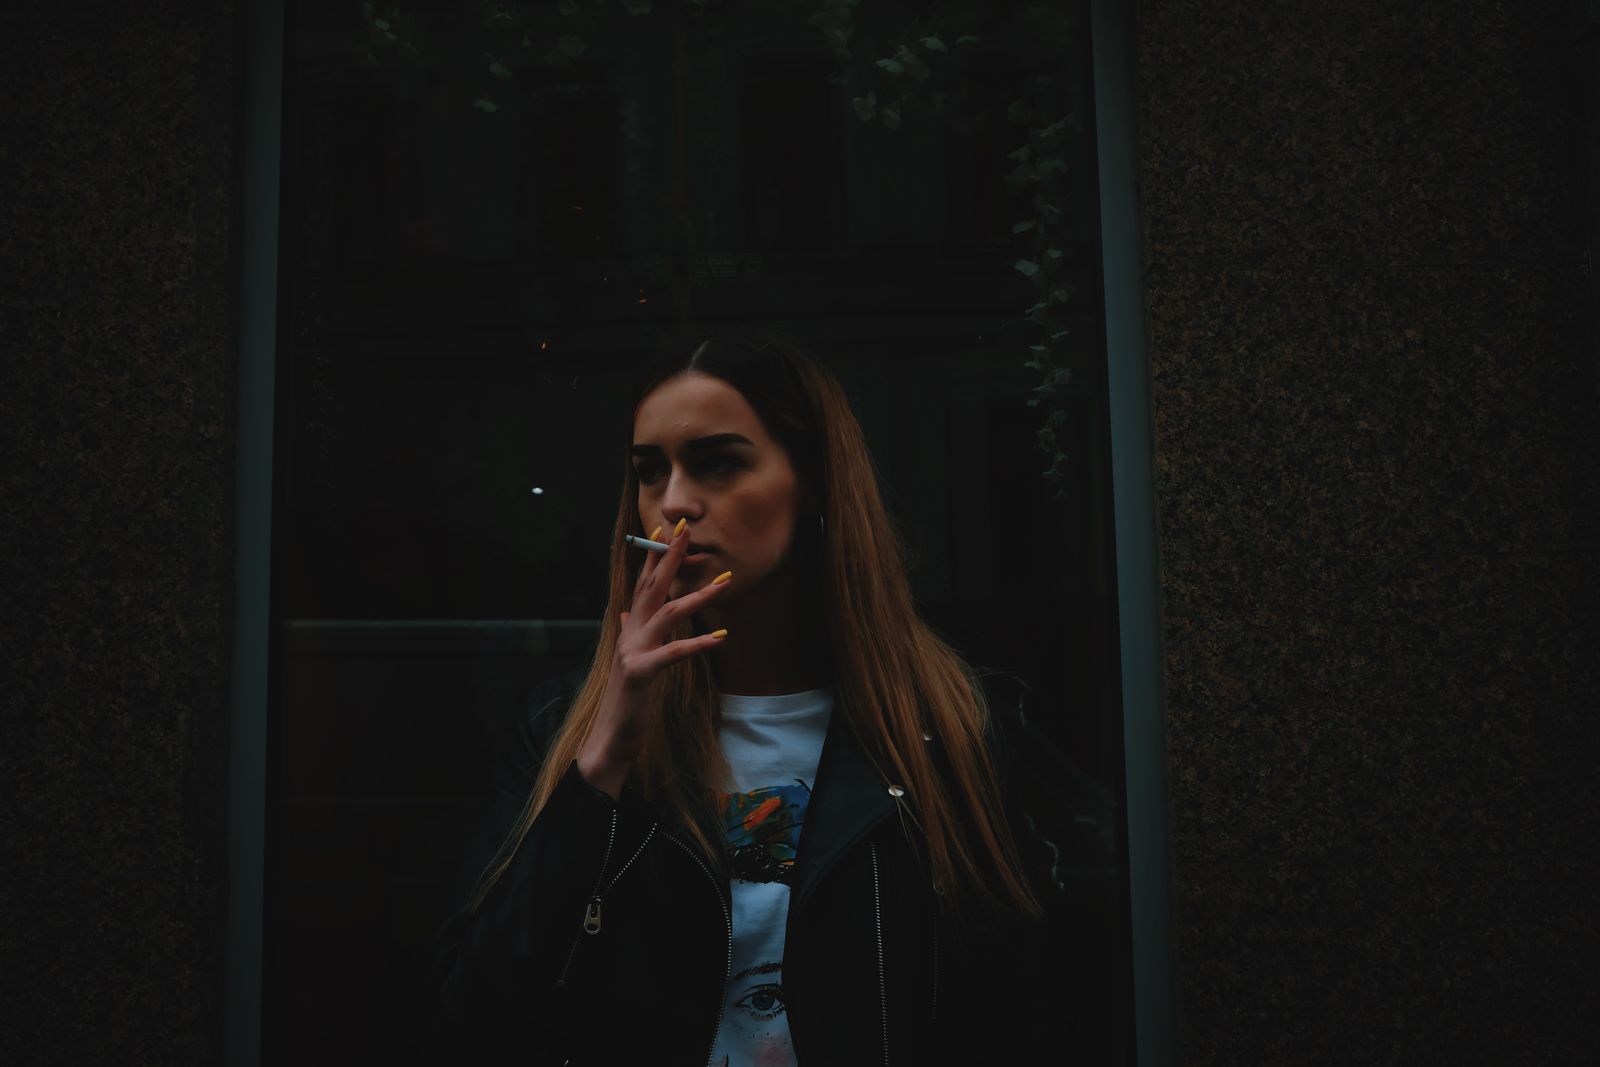 © Victoria Shabad - Image from the Smokers photography project